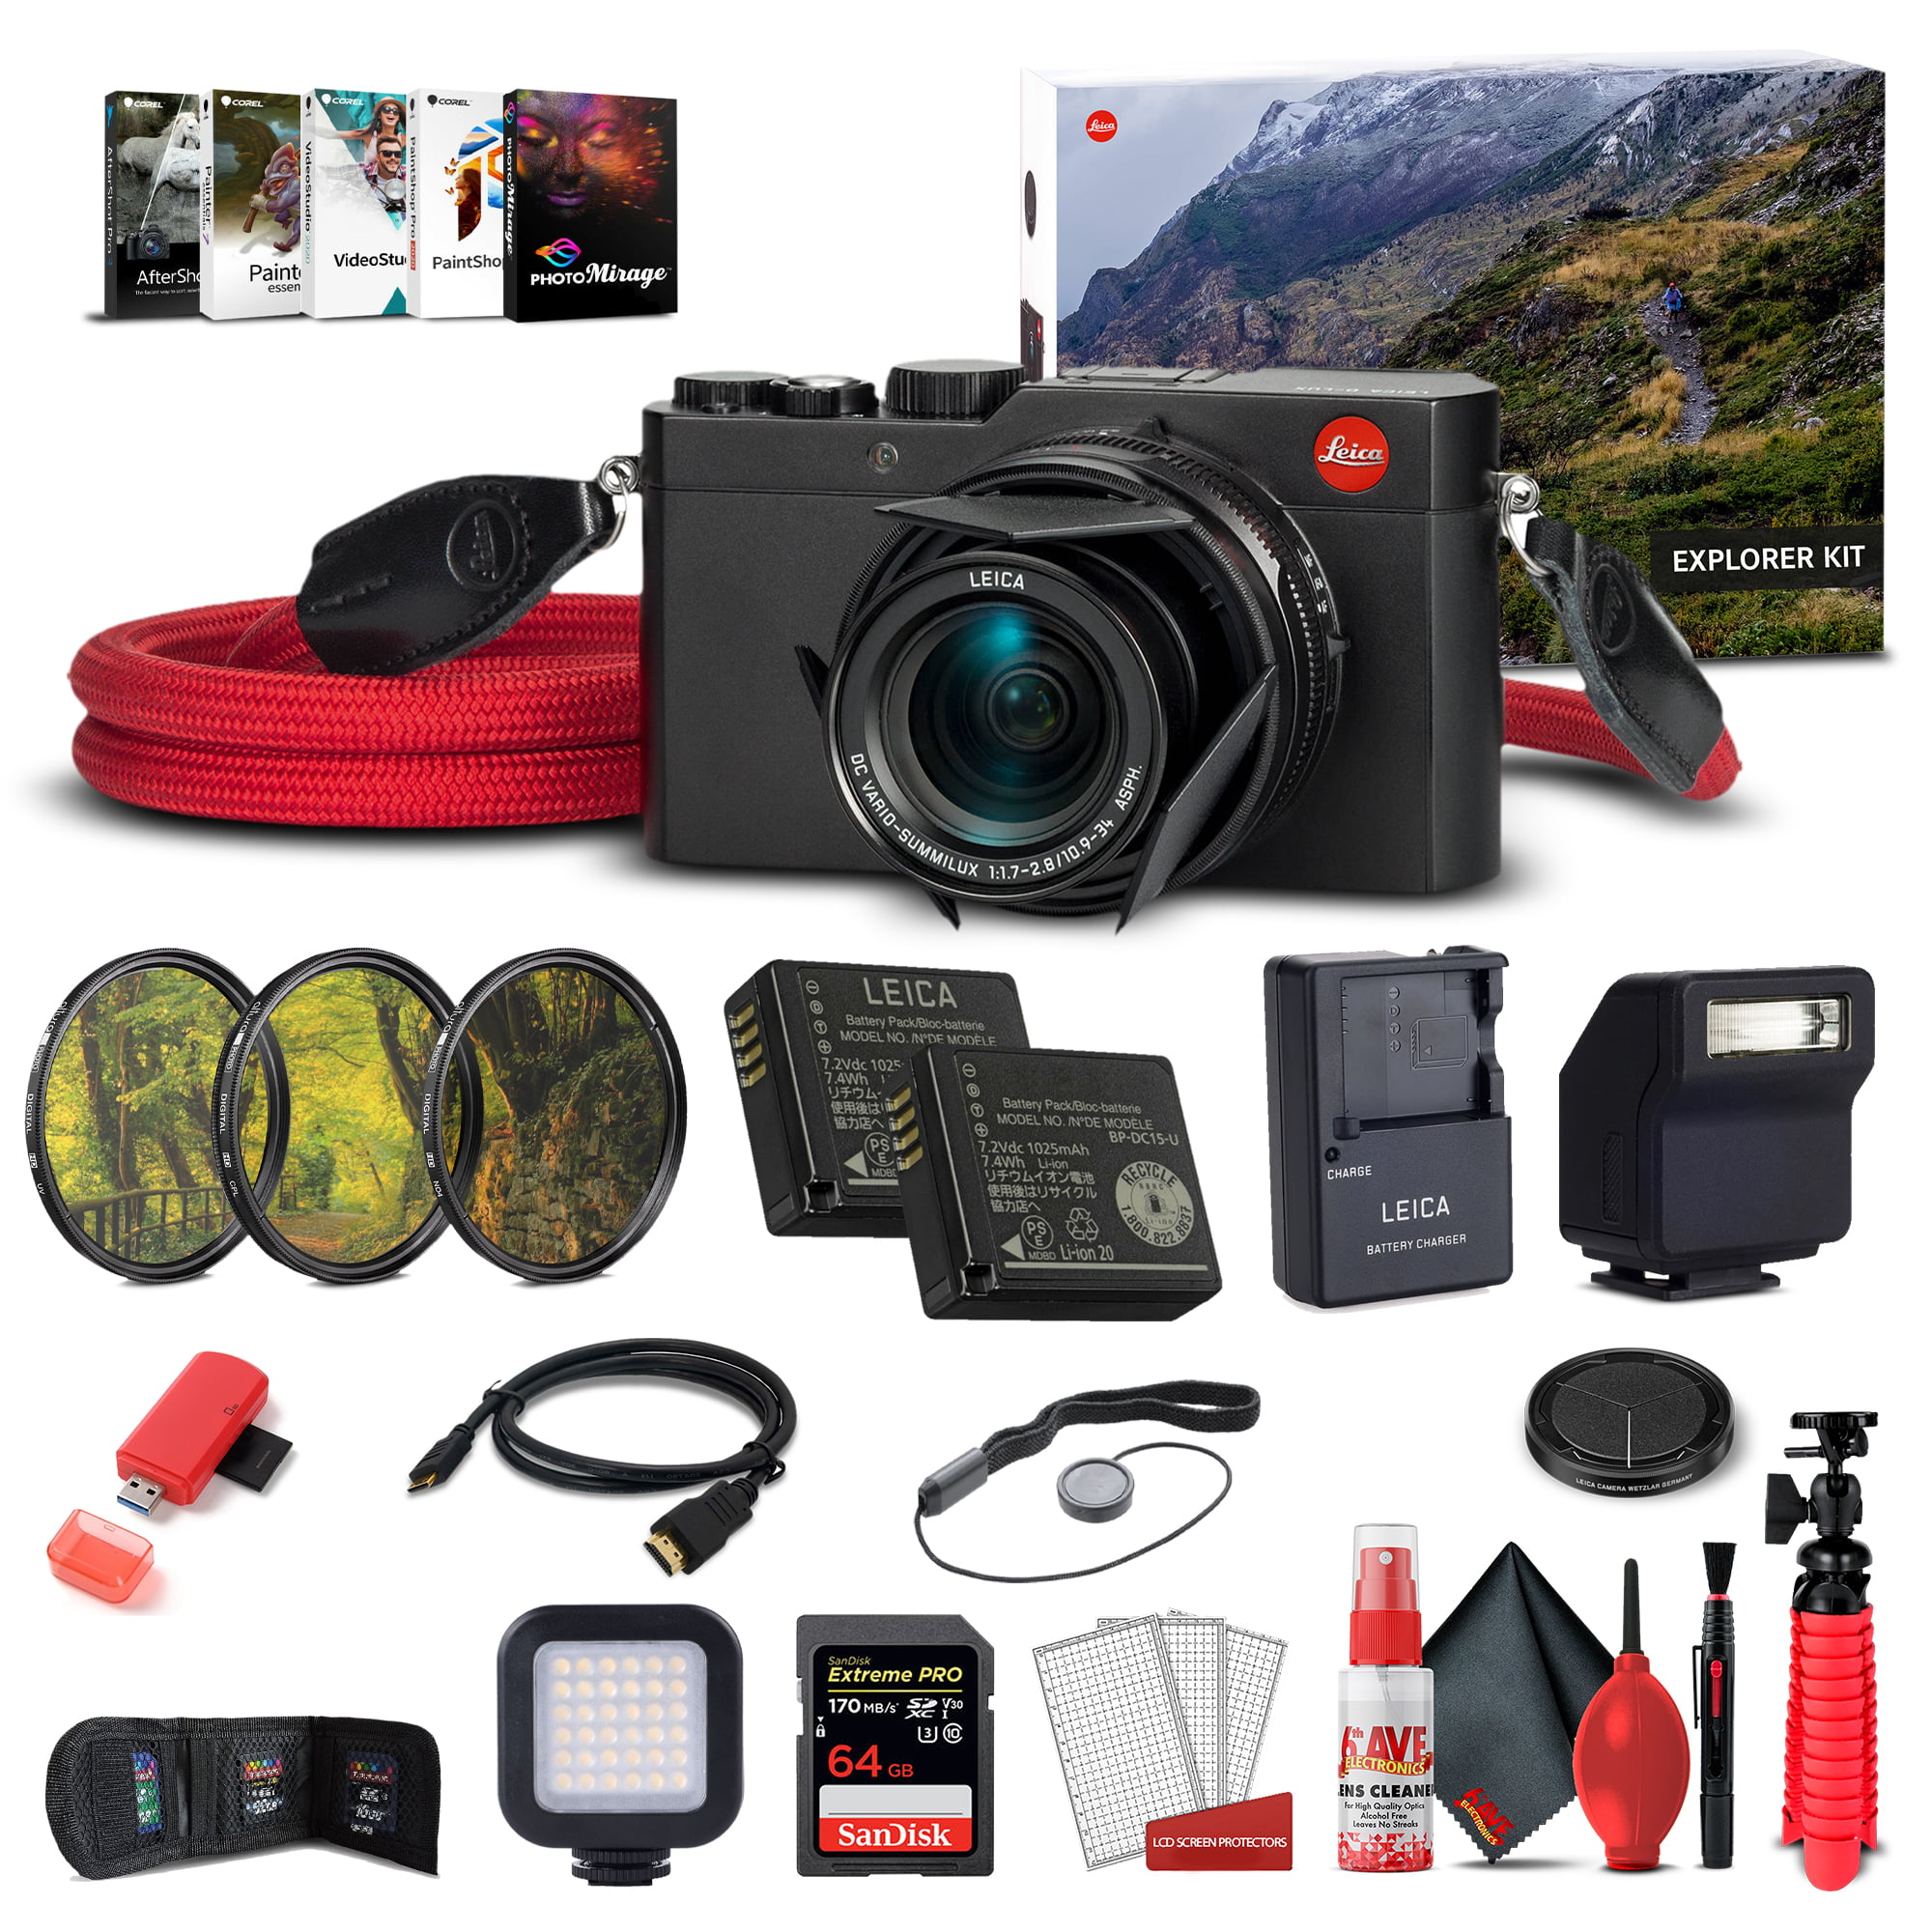 Leica D - LUX (Typ 109) Digital Camera Explorer Kit + 64GB Extreme Pro Card  + Corel Photo Software + Extra Battery + LED Light + Card Reader + 3 Piece  Filter Kit + Case and More - Deluxe Bundle 